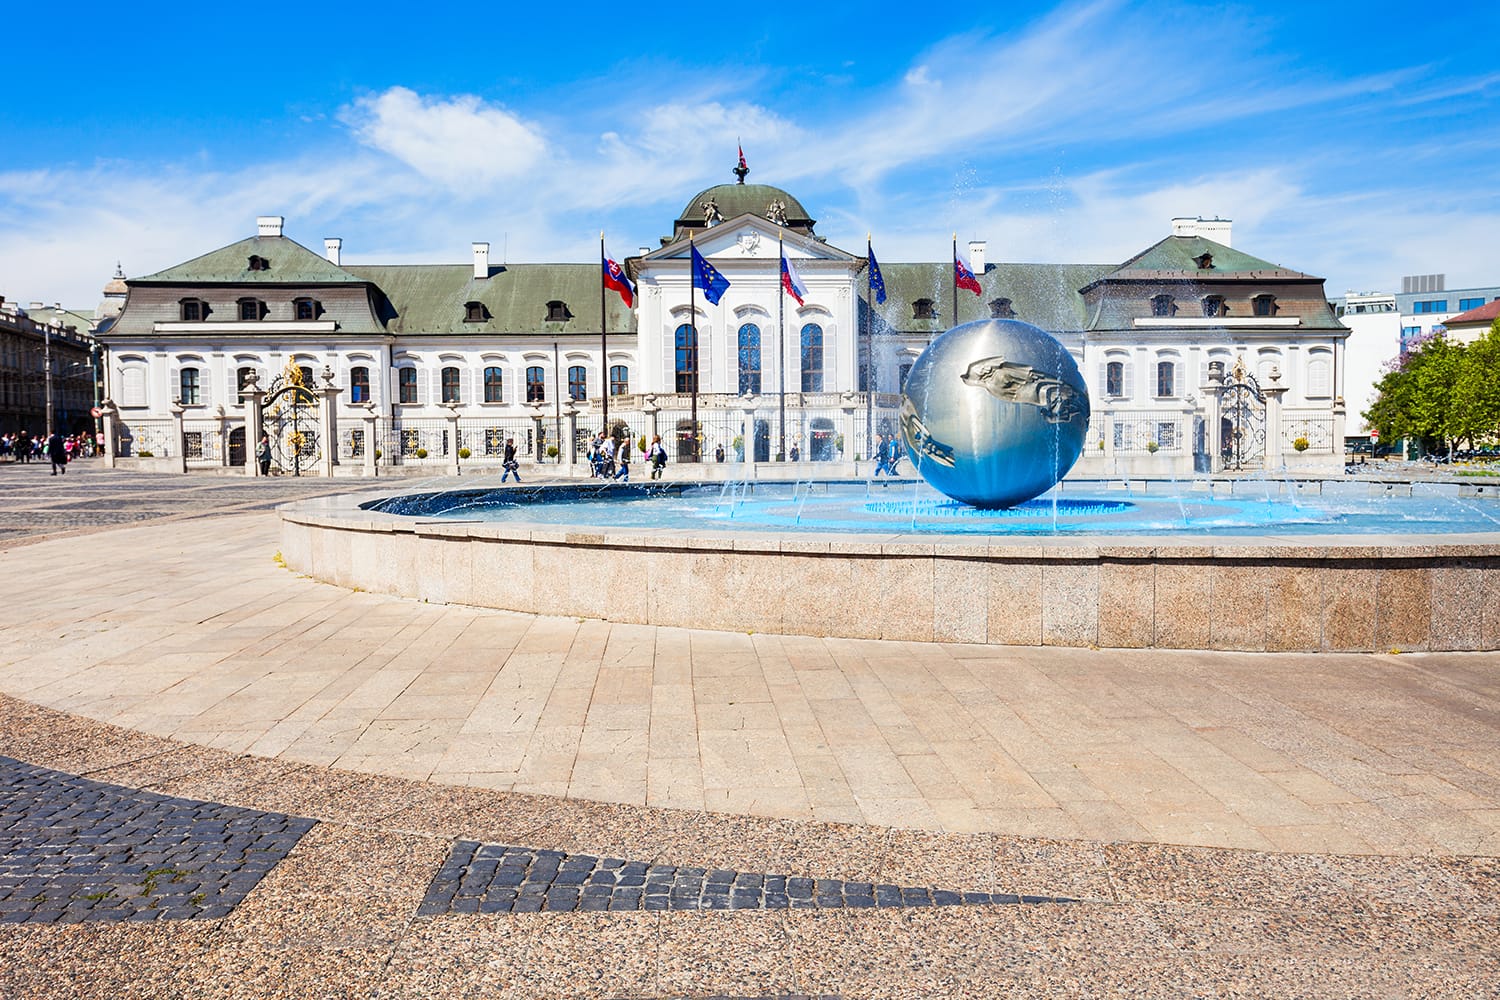 The Grassalkovich Palace is a palace in Bratislava and the residence of the president of Slovakia. Grassalkovich Palace is situated on Hodzovo Namestie square.